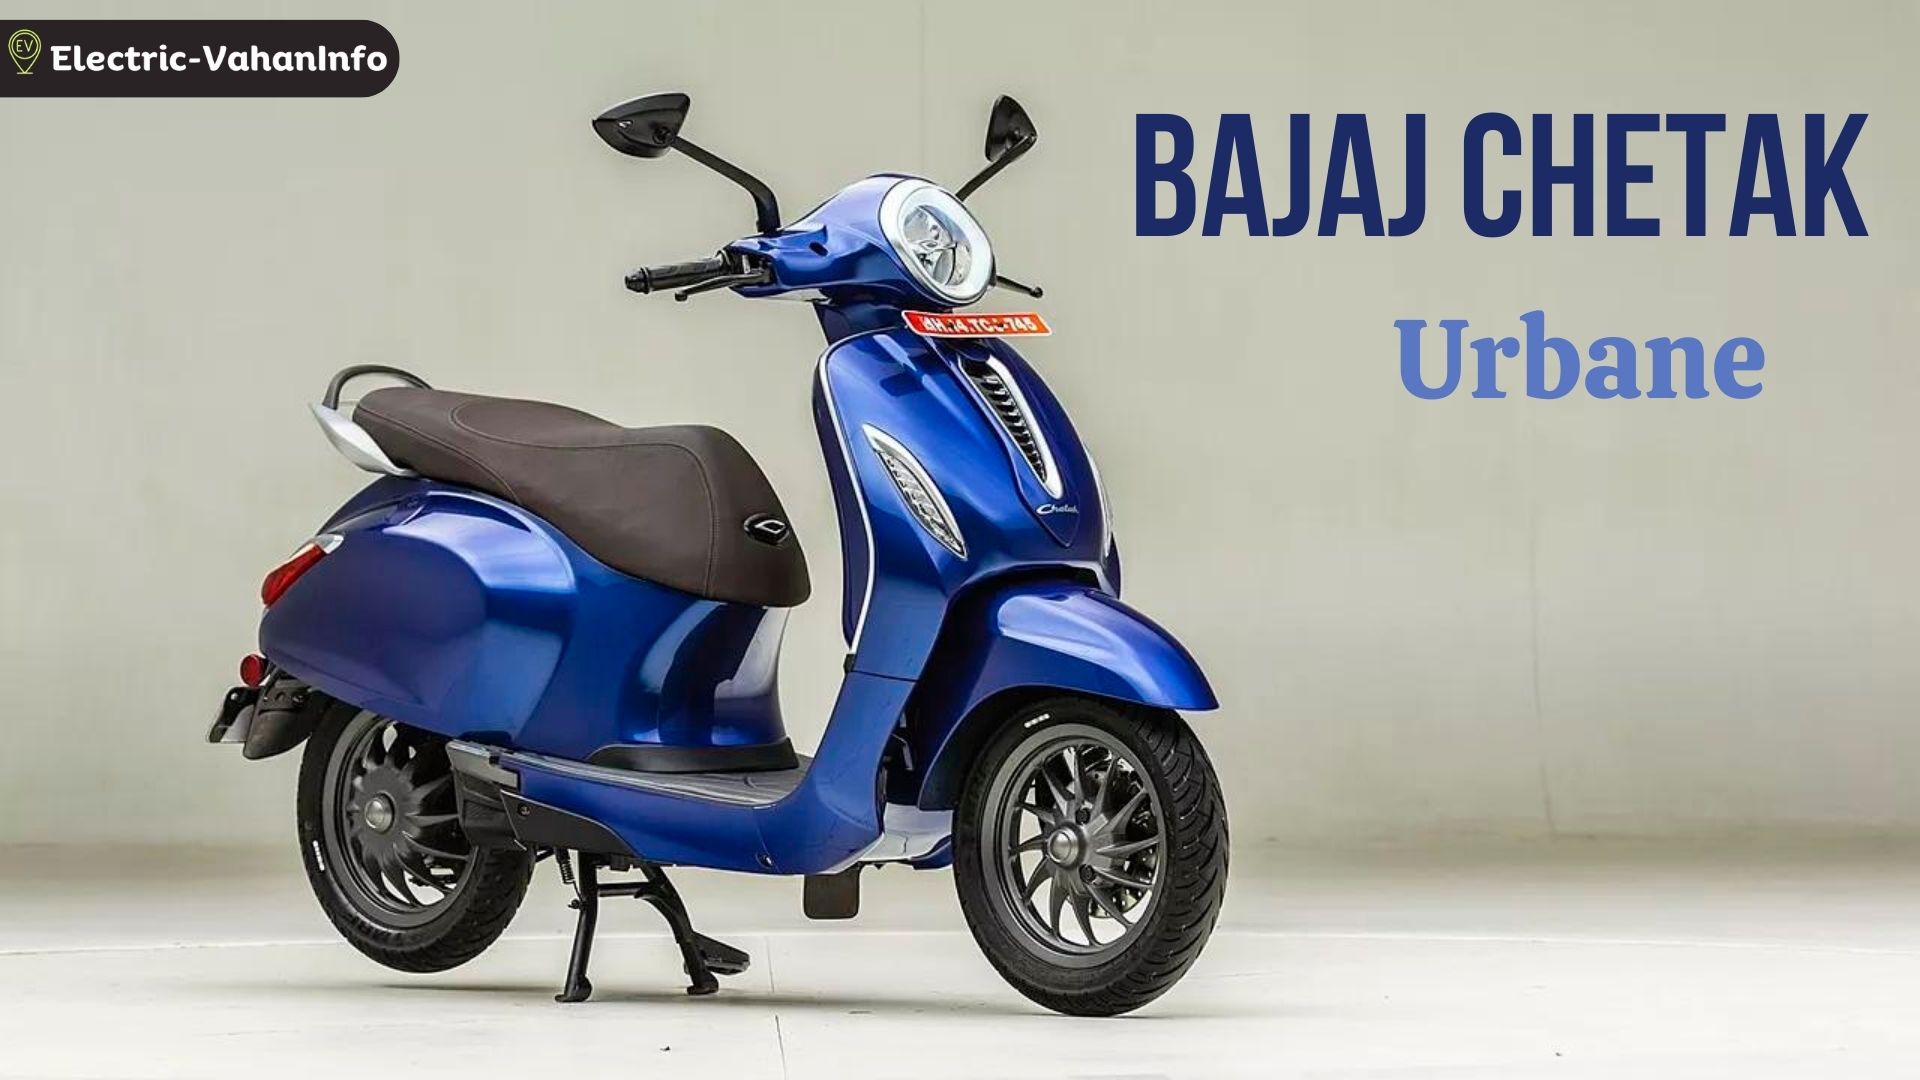 https://electric-vahaninfo.com/bajaj-chetak-urbane-electric-scooter-launched-priced-at-1-15-lakh/